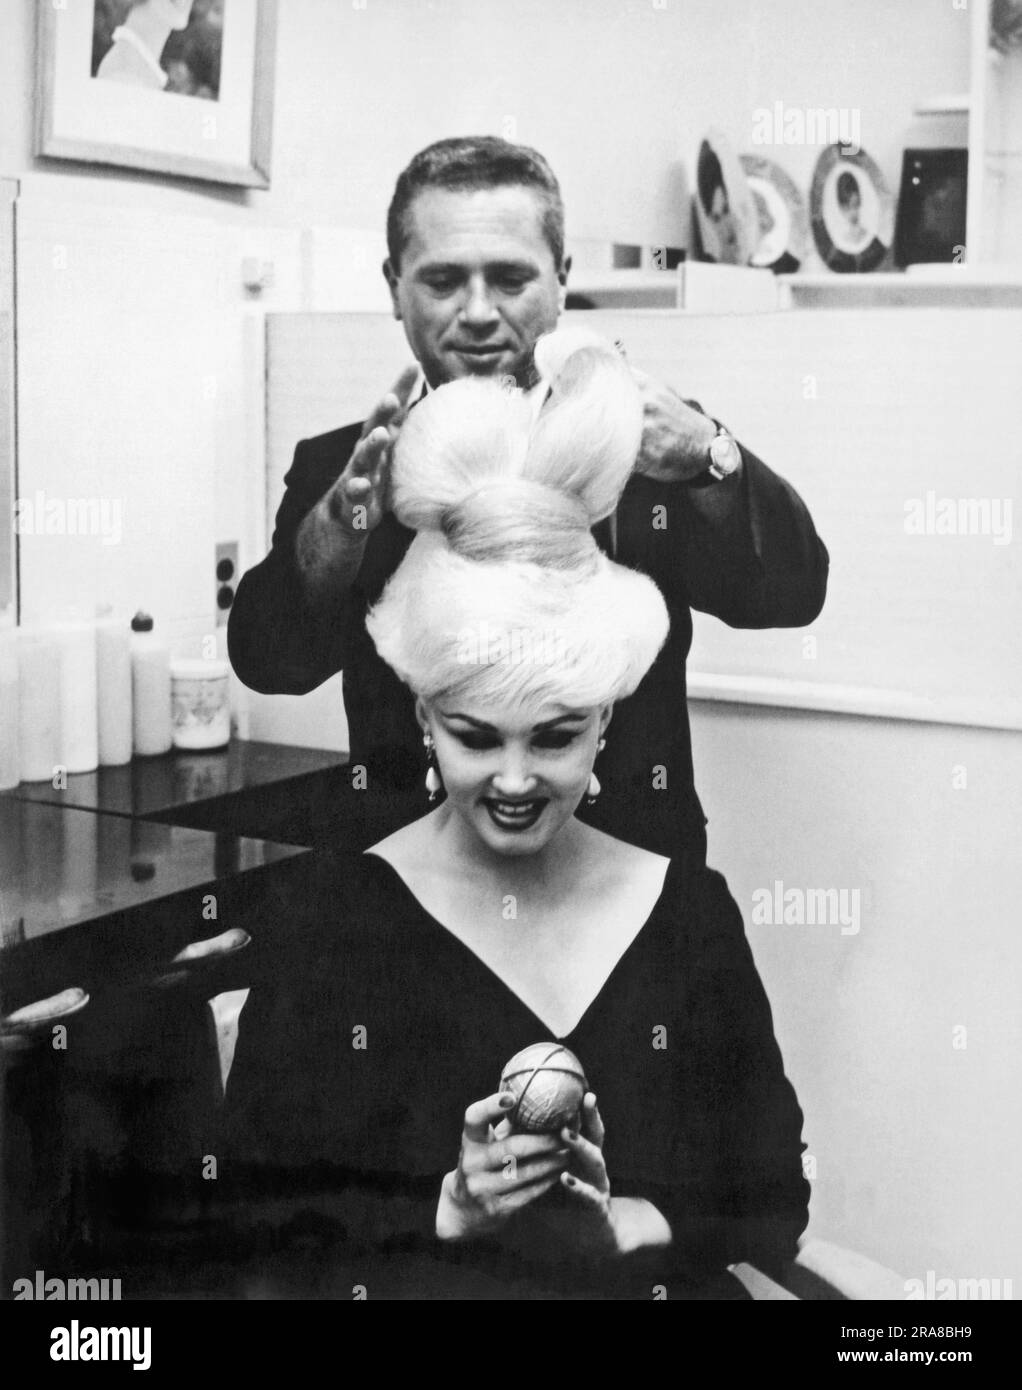 New York, New York:  1964. Stylist John Fonda puts the finishing touches on 'The Unisphere Hairdo', on Ecstasy, a featured stripper in the Broadway play, 'This Was Burlesque'. The hair was inspired by the official symbol of the 1964 NY World's Fair. Stock Photo